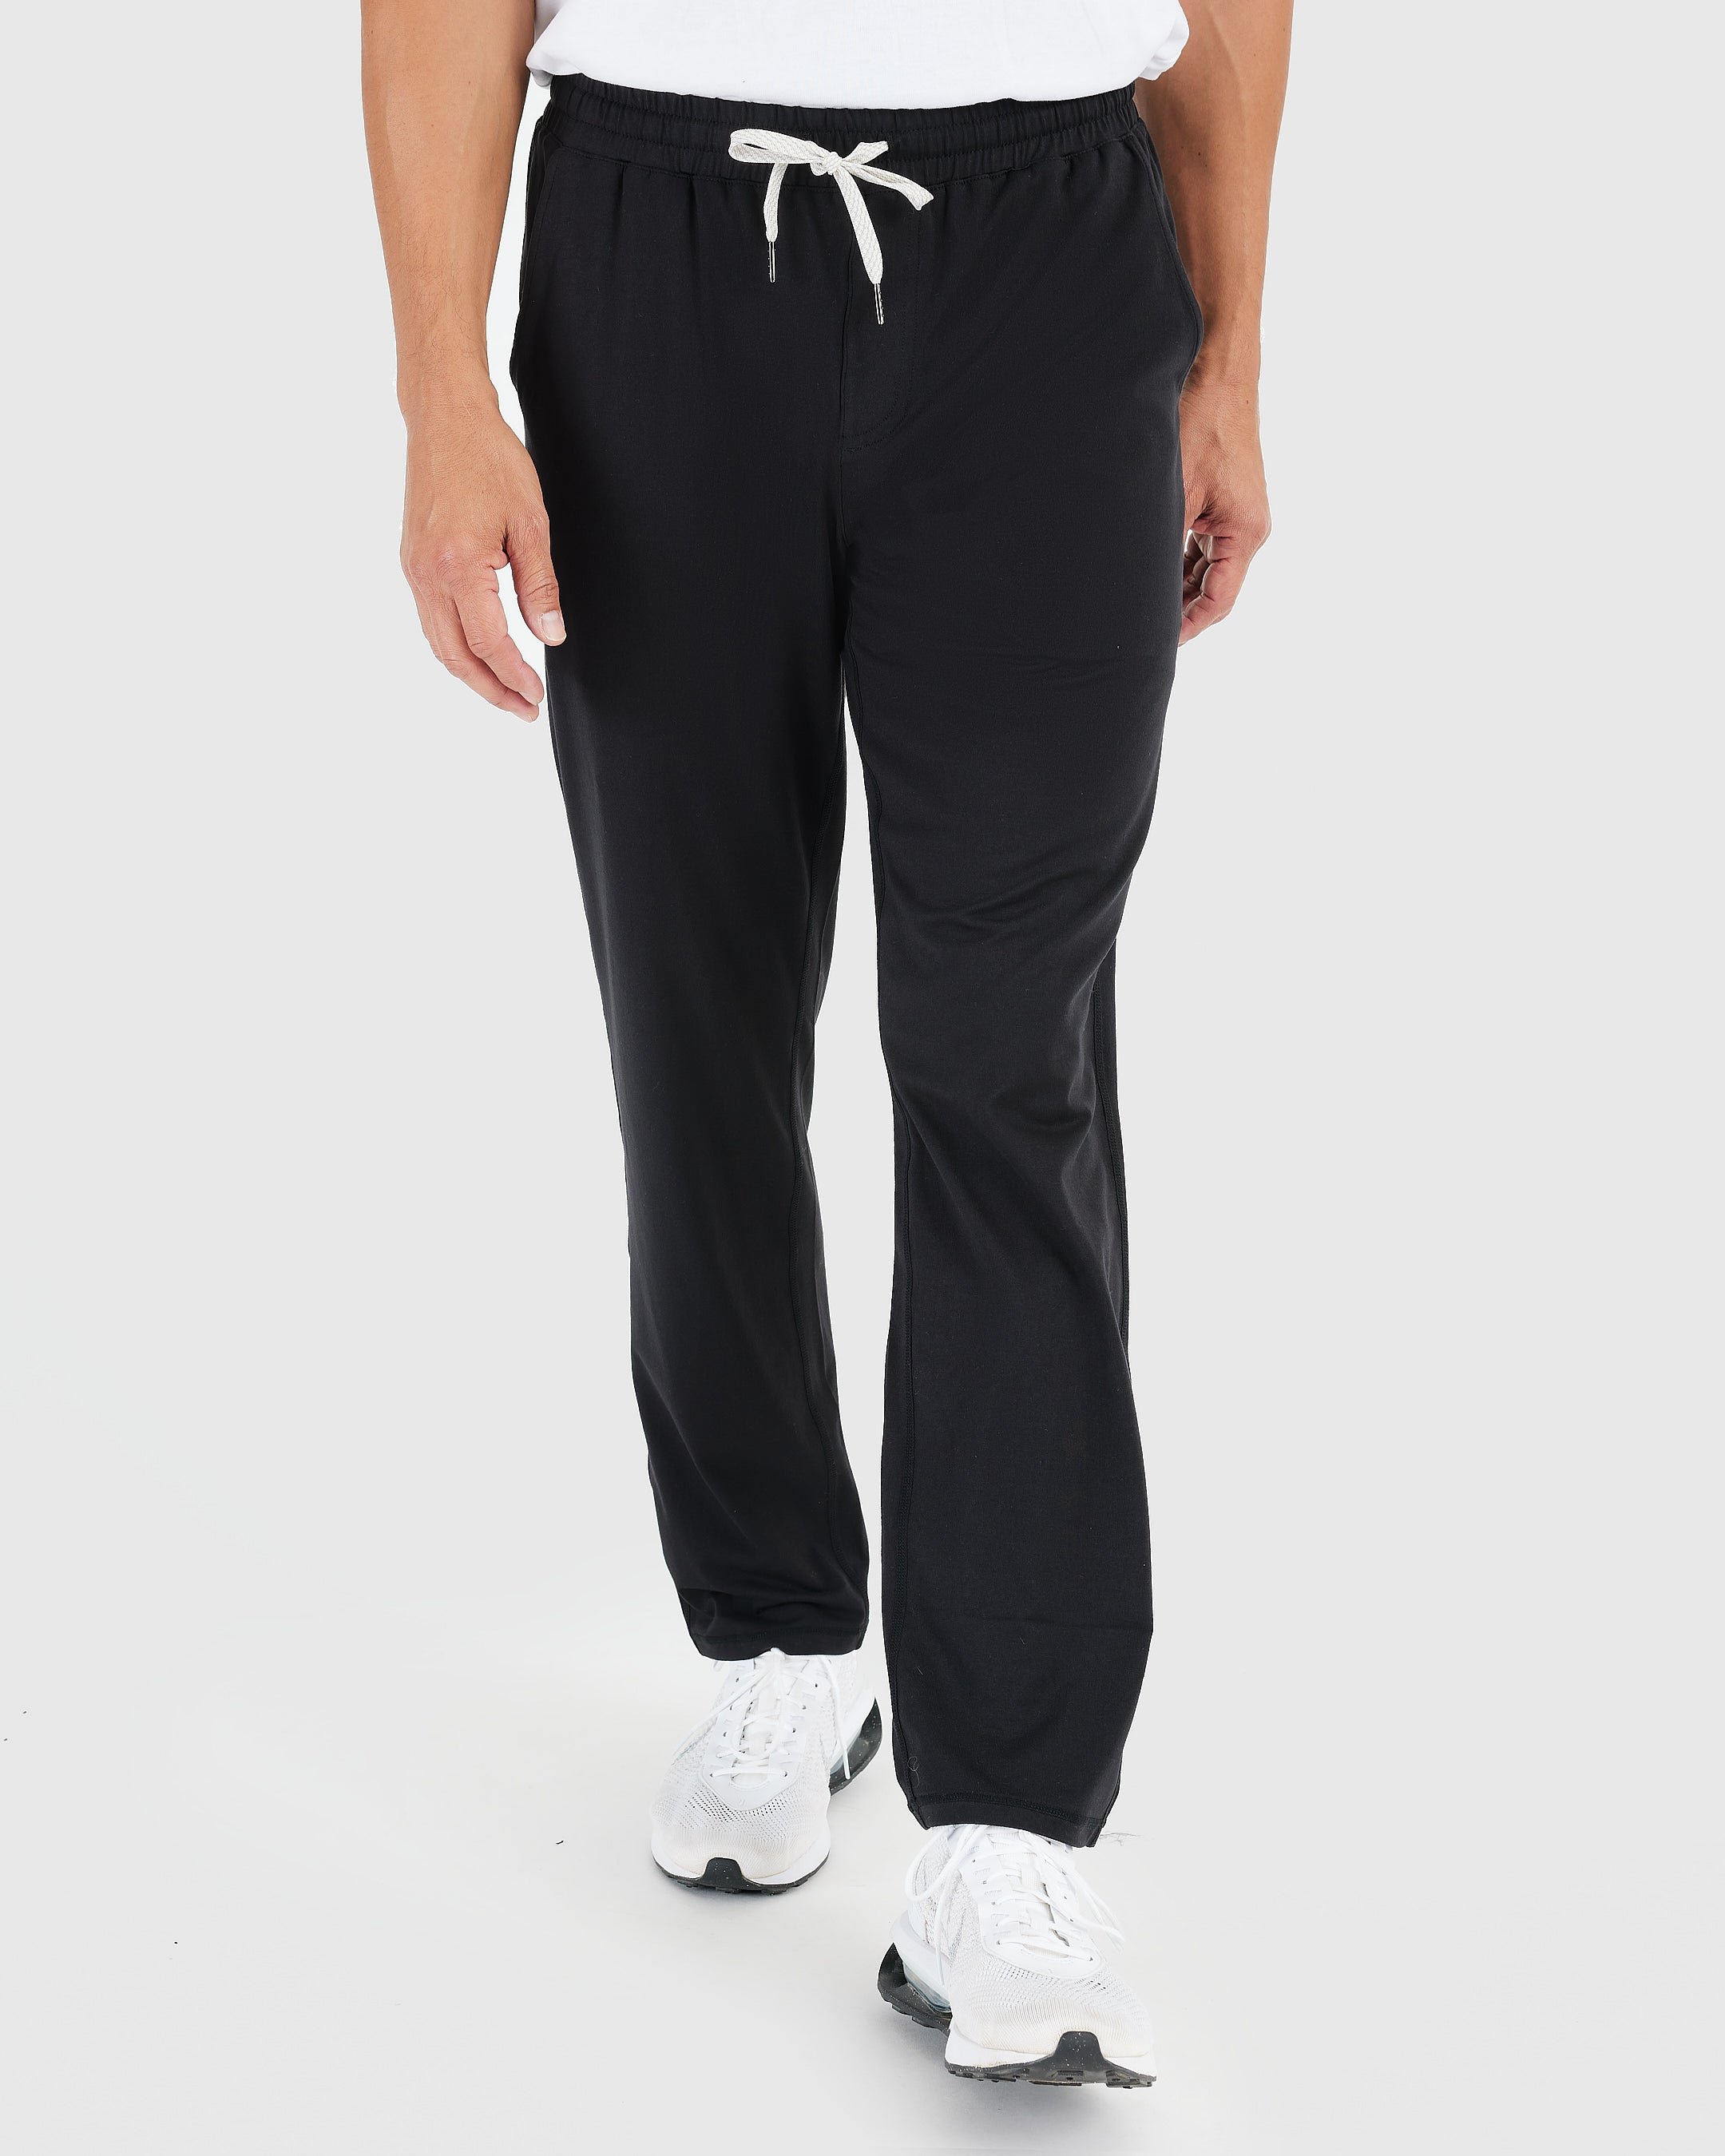 All Black Active Comfort Pant 2-Pack